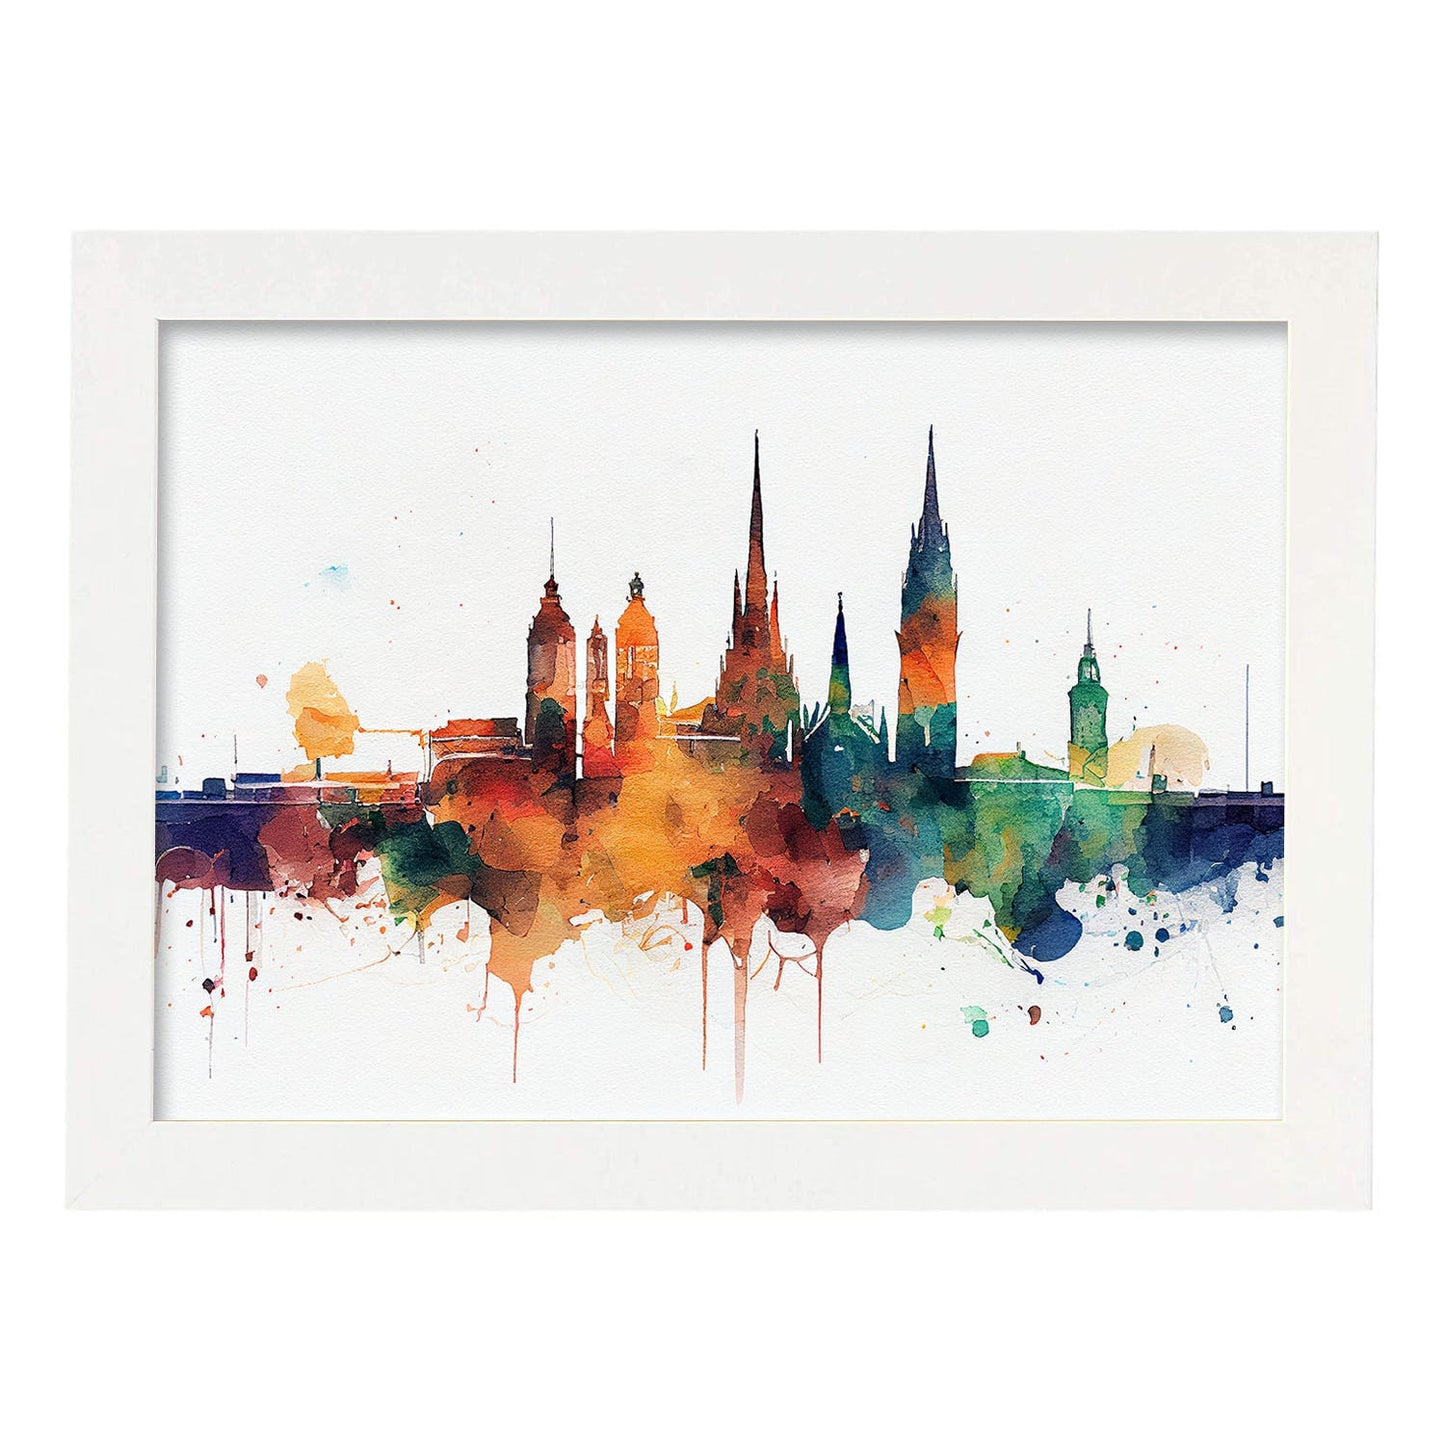 Nacnic watercolor of a skyline of the city of Vienna_1. Aesthetic Wall Art Prints for Bedroom or Living Room Design.-Artwork-Nacnic-A4-Marco Blanco-Nacnic Estudio SL